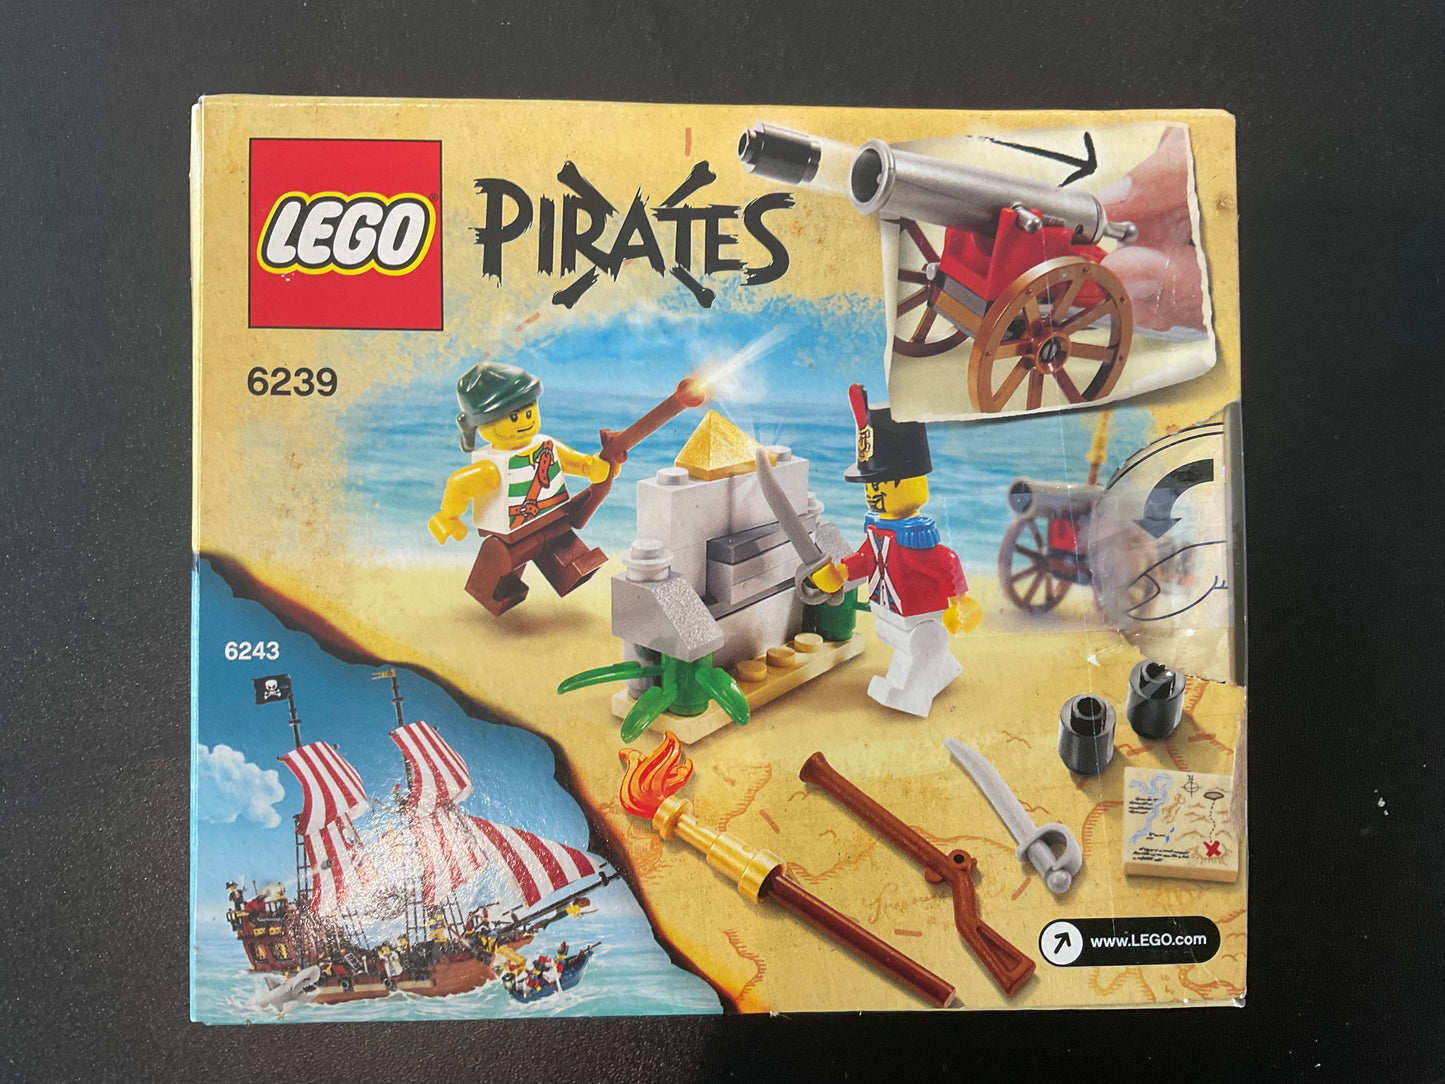 Lego Pirates Cannon Battle 6239 - Certified